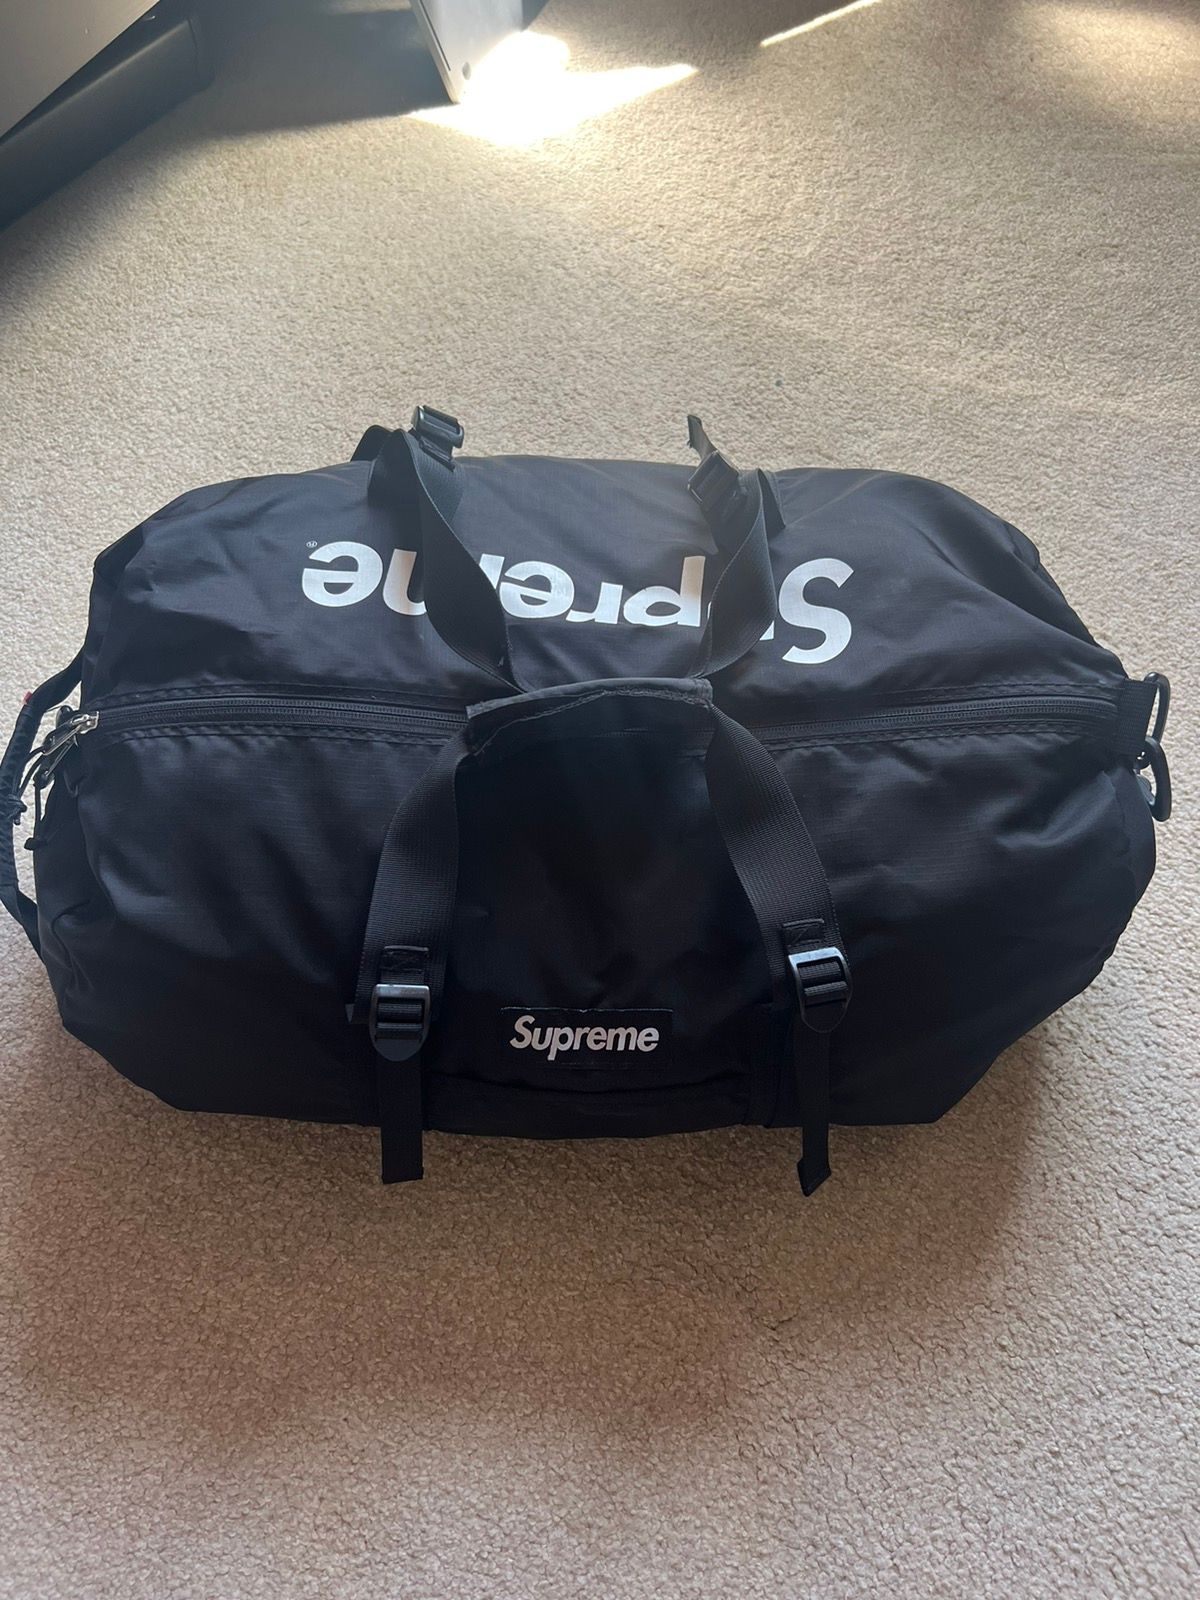 Supreme Duffle Bag Red FW18 (Pre Owned)